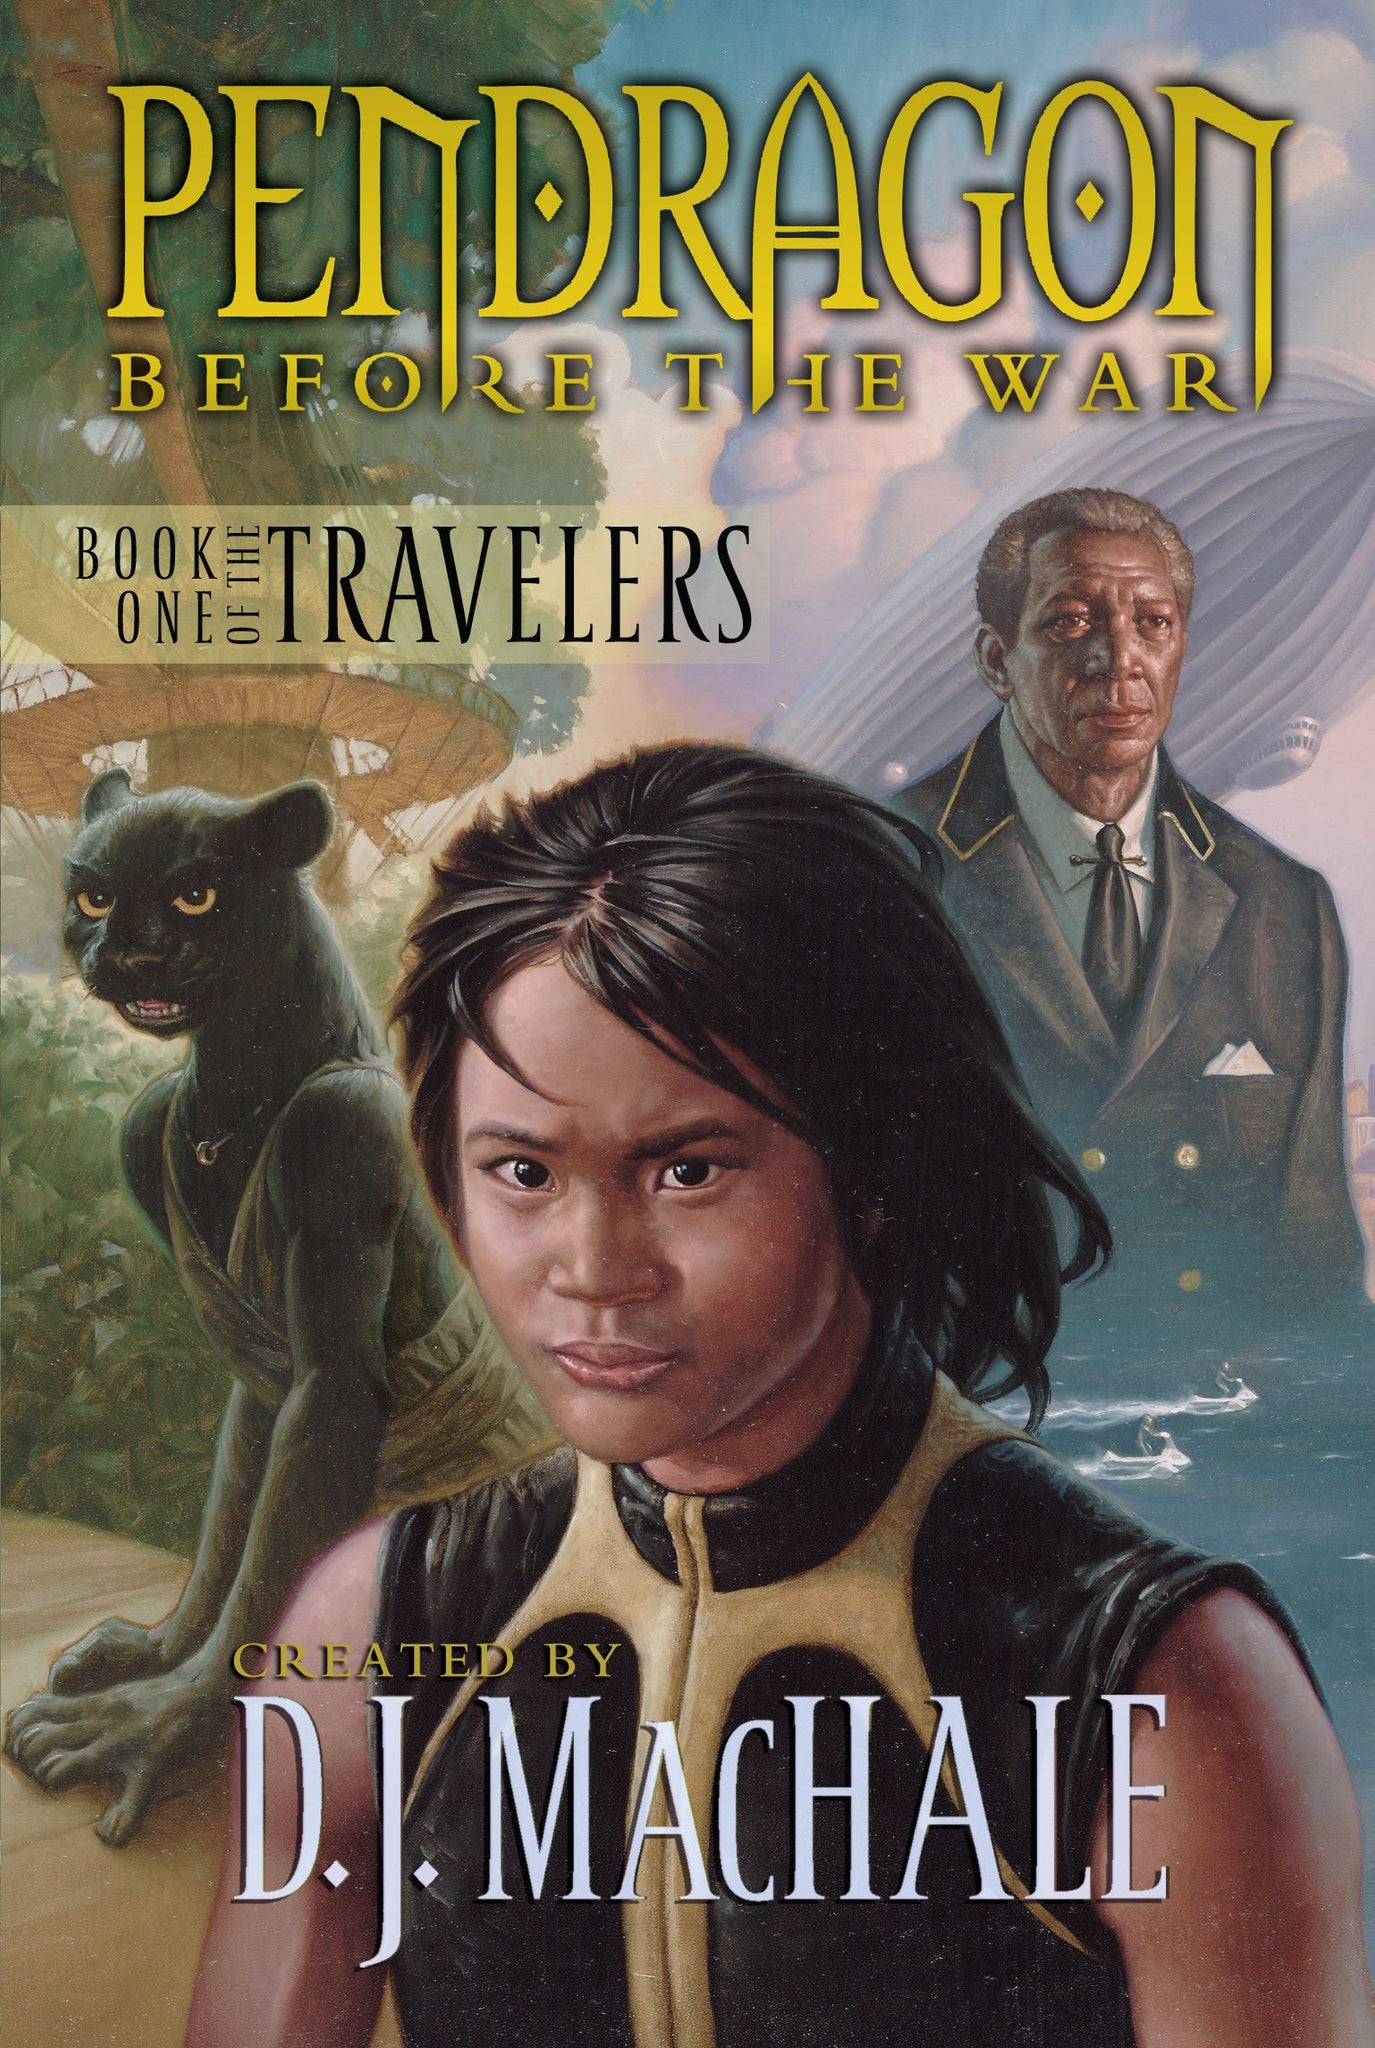 Book One of the Travelers